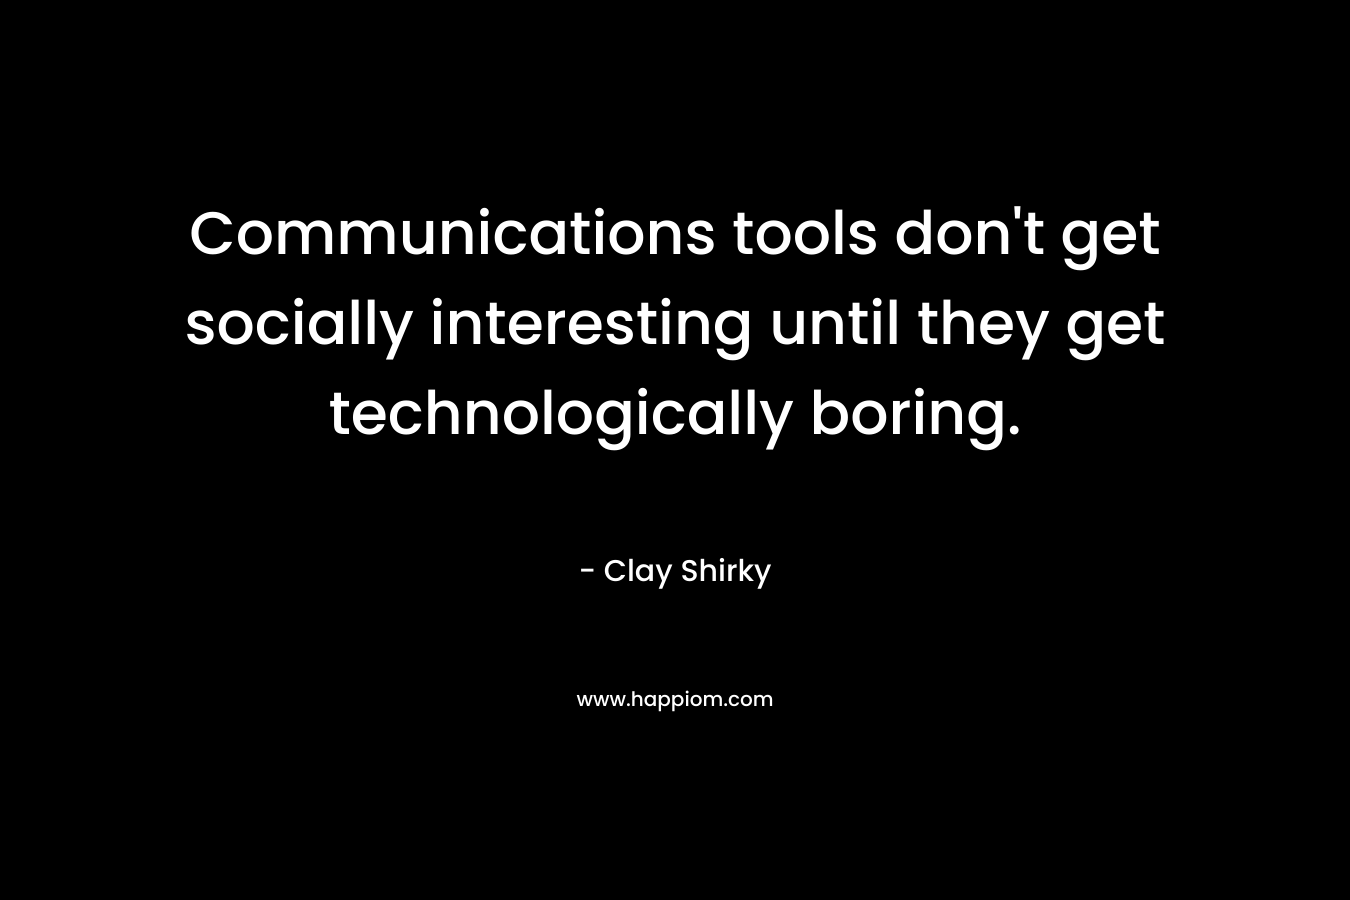 Communications tools don’t get socially interesting until they get technologically boring. – Clay Shirky